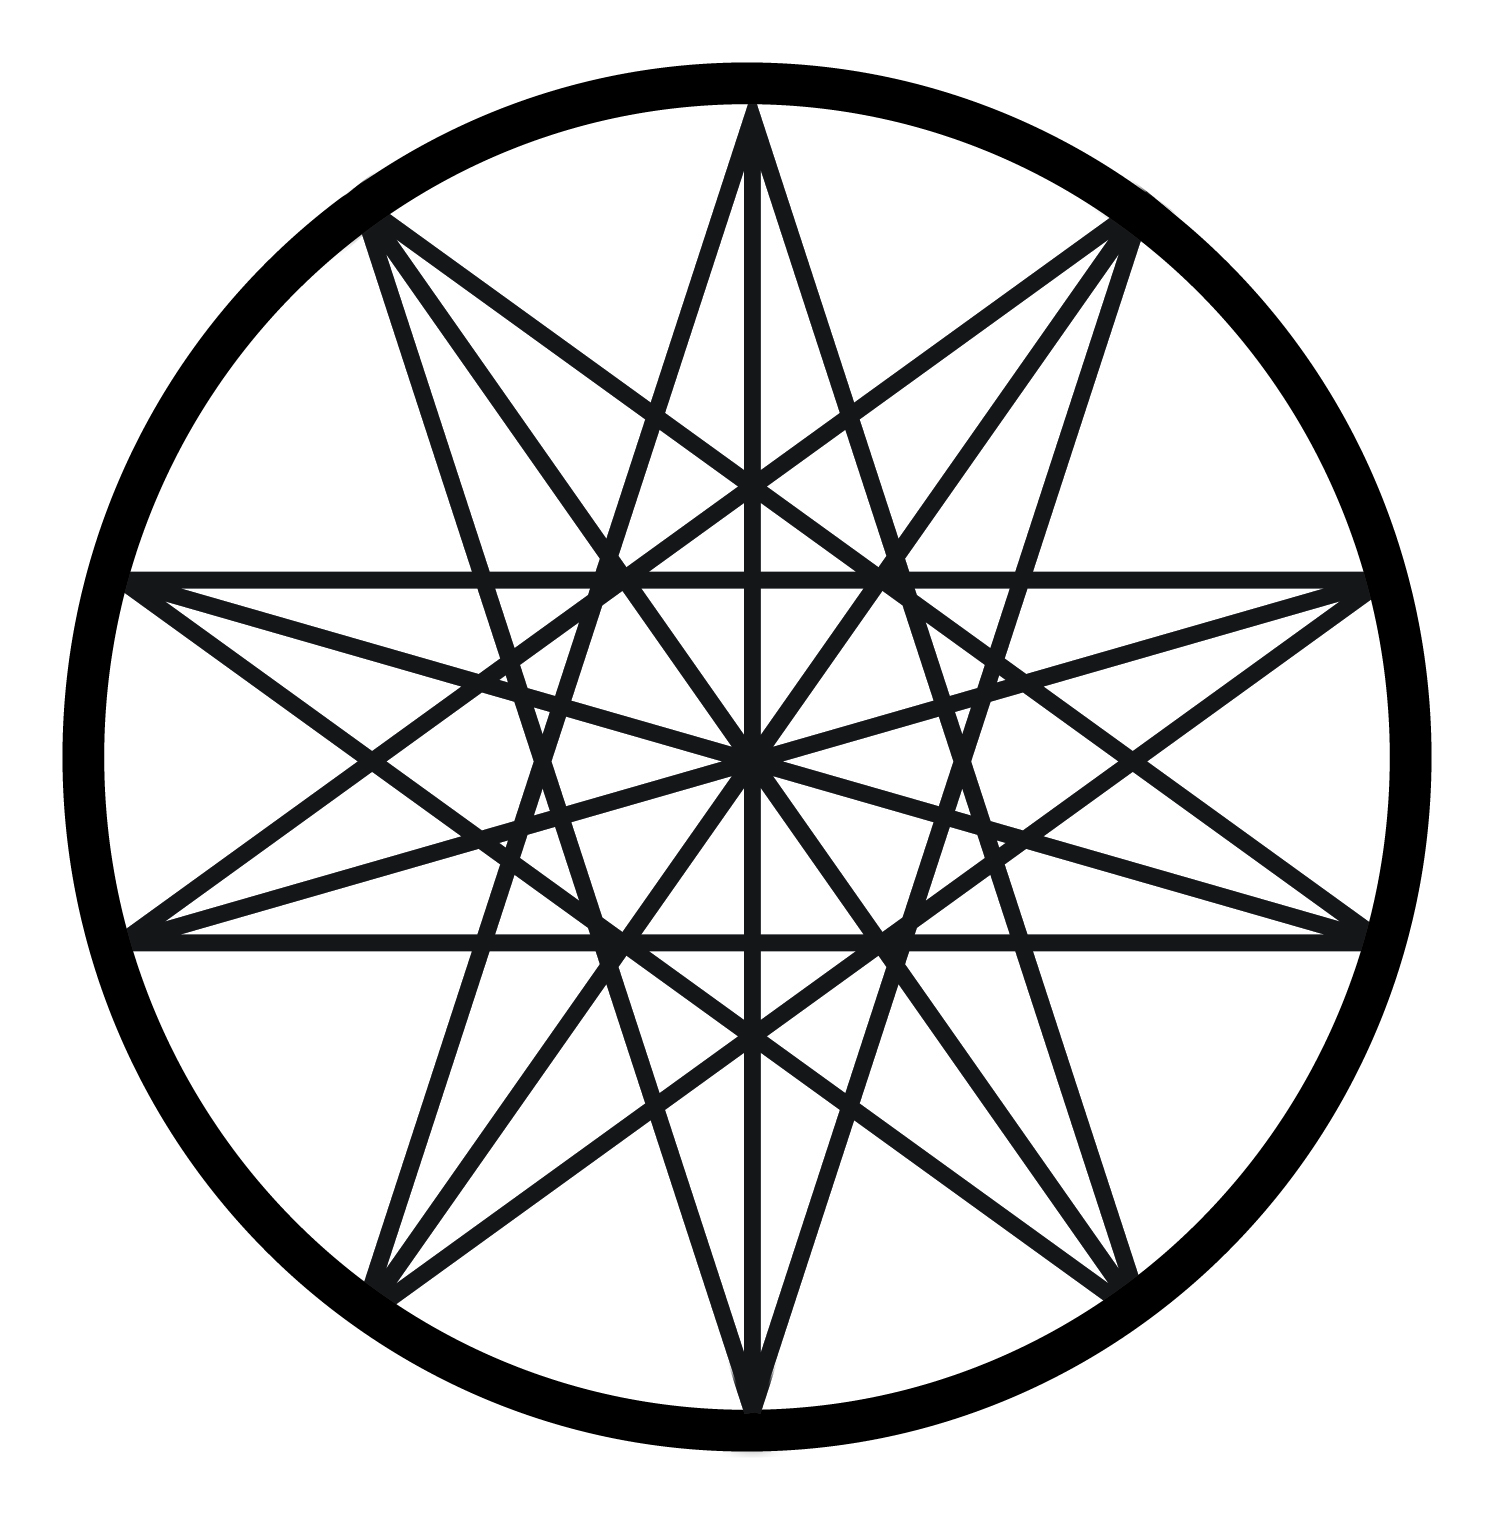 49 10 Pointed Star Symbol Meaning